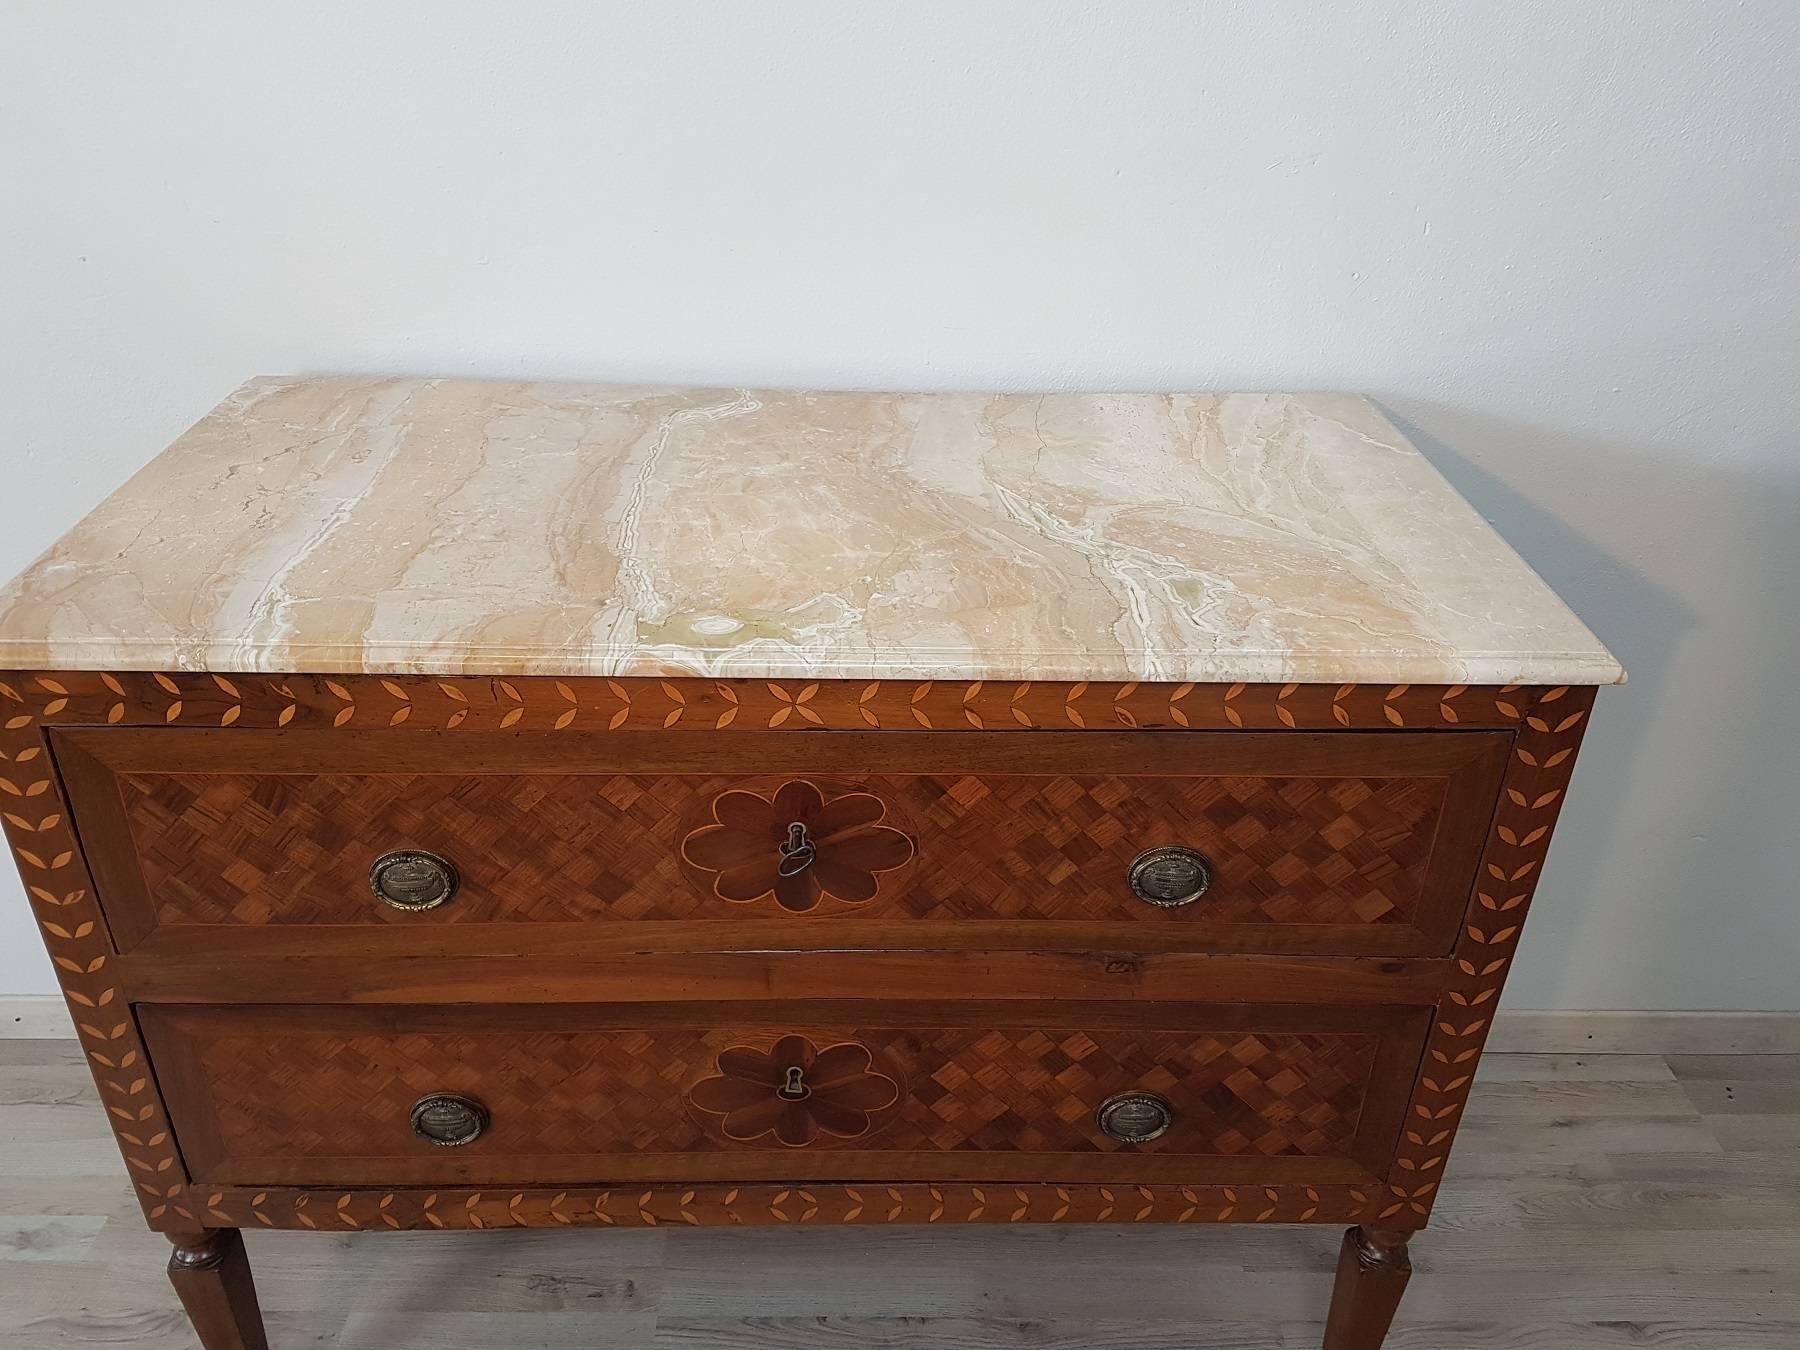 Elegant antique chest of drawers Luigi XVI vintage refined wood inlay processing of different woods with geometric motifs. The pink marble top is from the 20th century. Perfect condition inside lined with elegant velvet. Coming from the furniture of